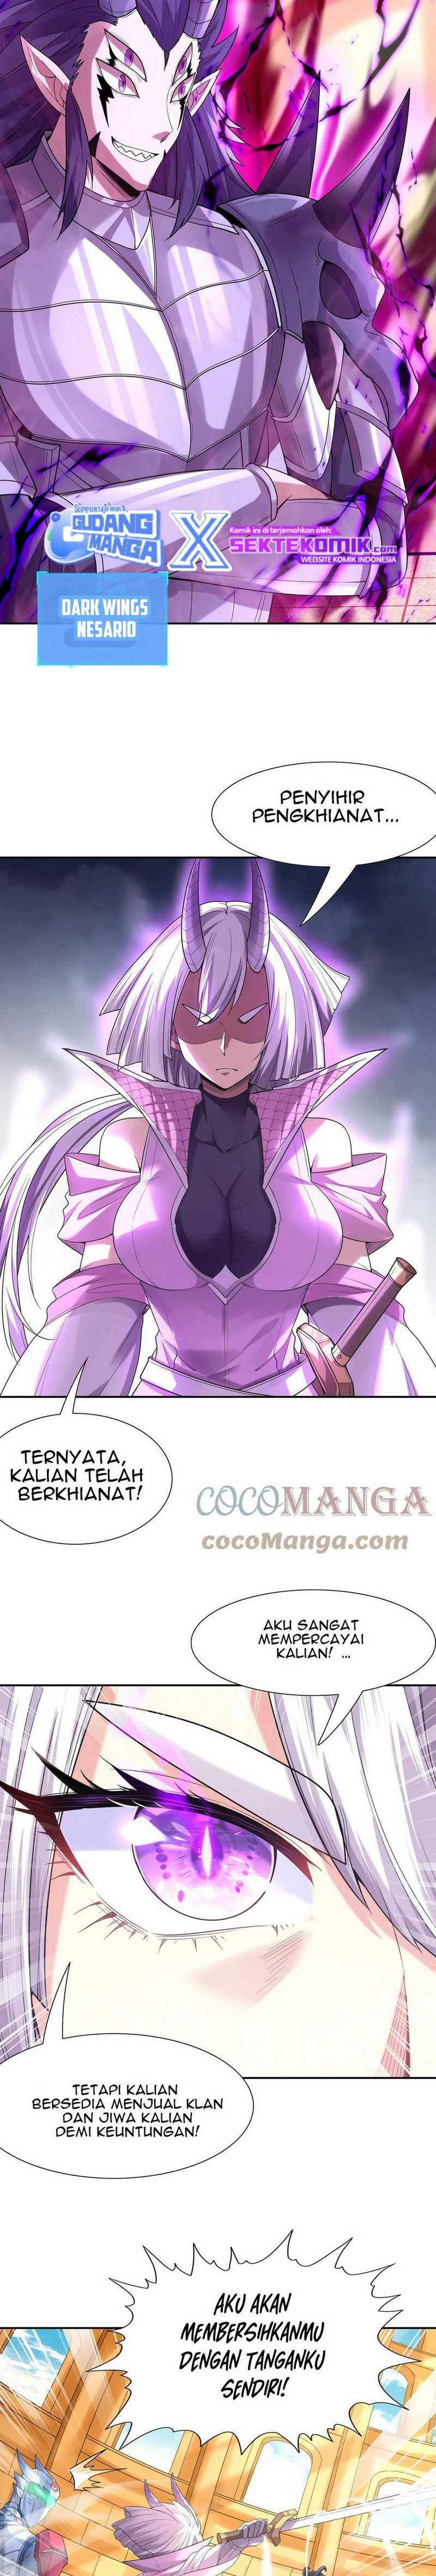 My Harem Is Entirely Female Demon Villains Chapter 33